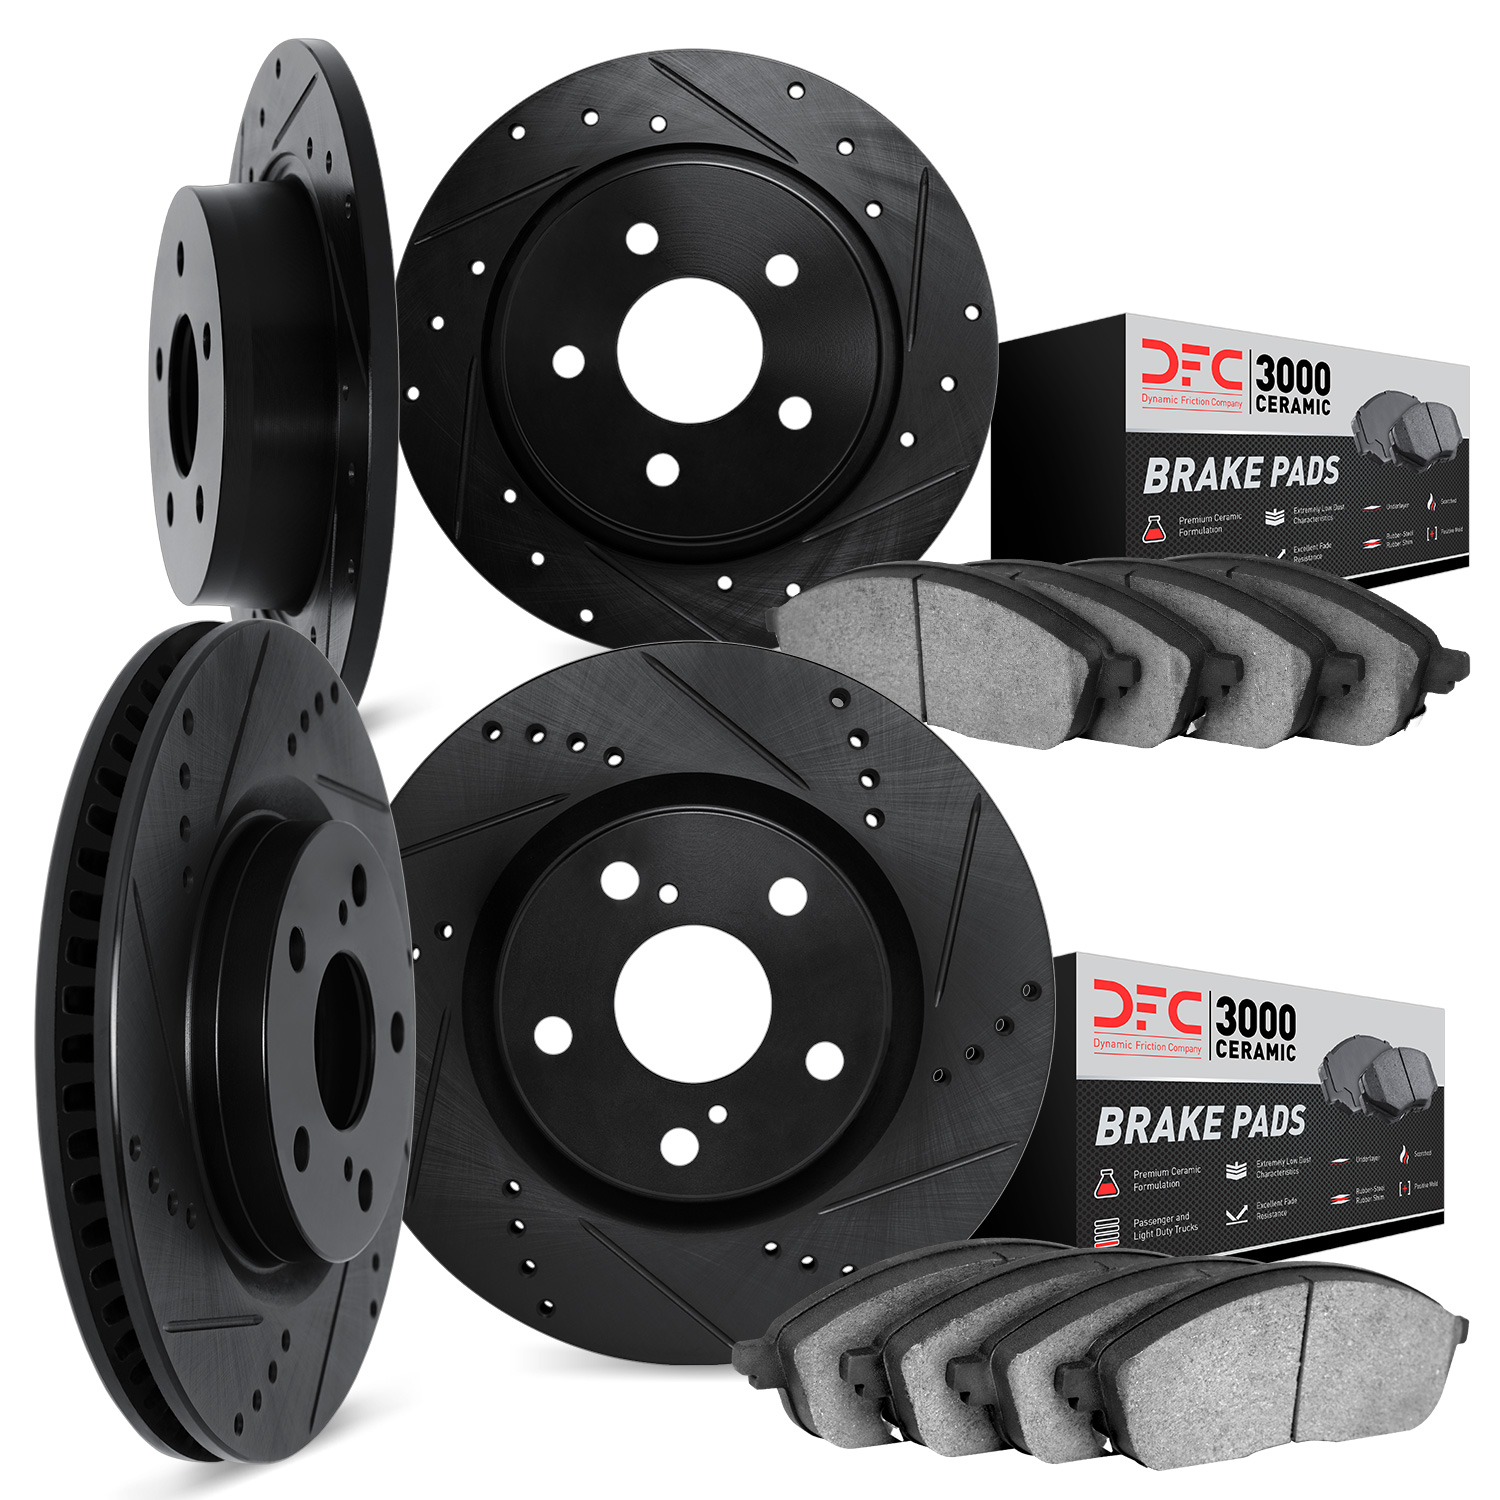 8304-31063 Drilled/Slotted Brake Rotors with 3000-Series Ceramic Brake Pads Kit [Black], 2007-2012 BMW, Position: Front and Rear